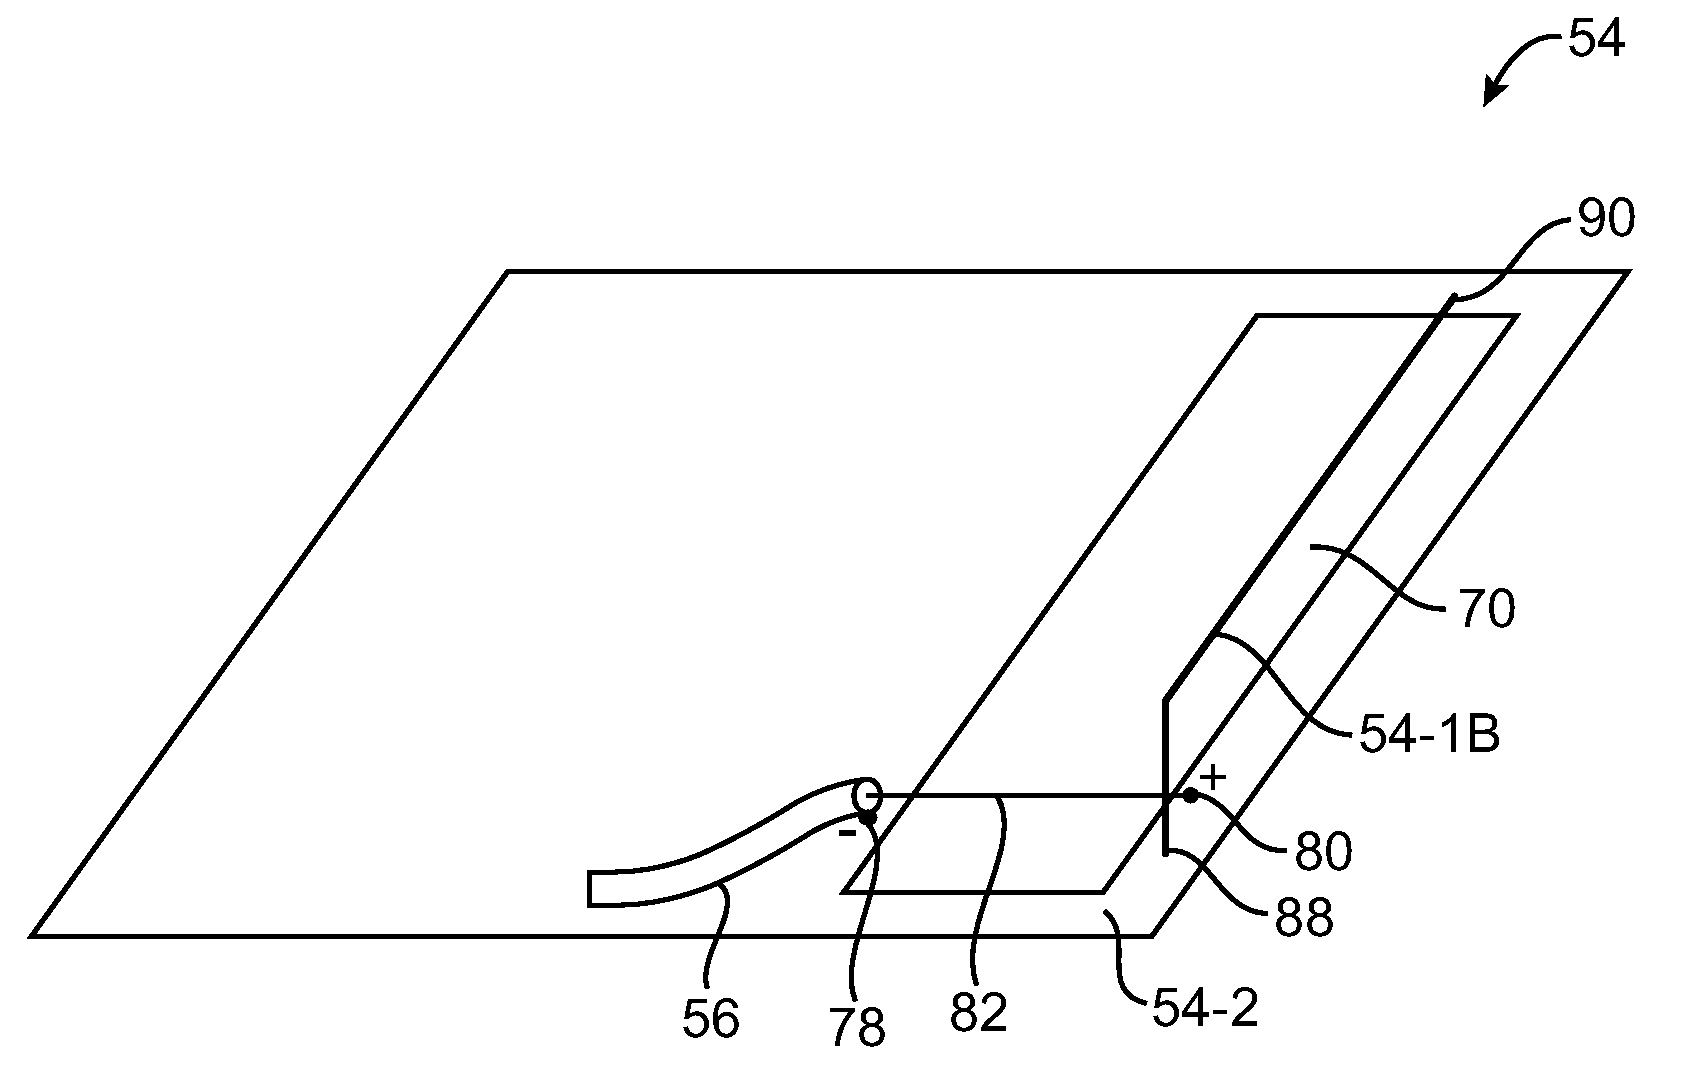 Hybrid antennas with directly fed antenna slots for handheld electronic devices